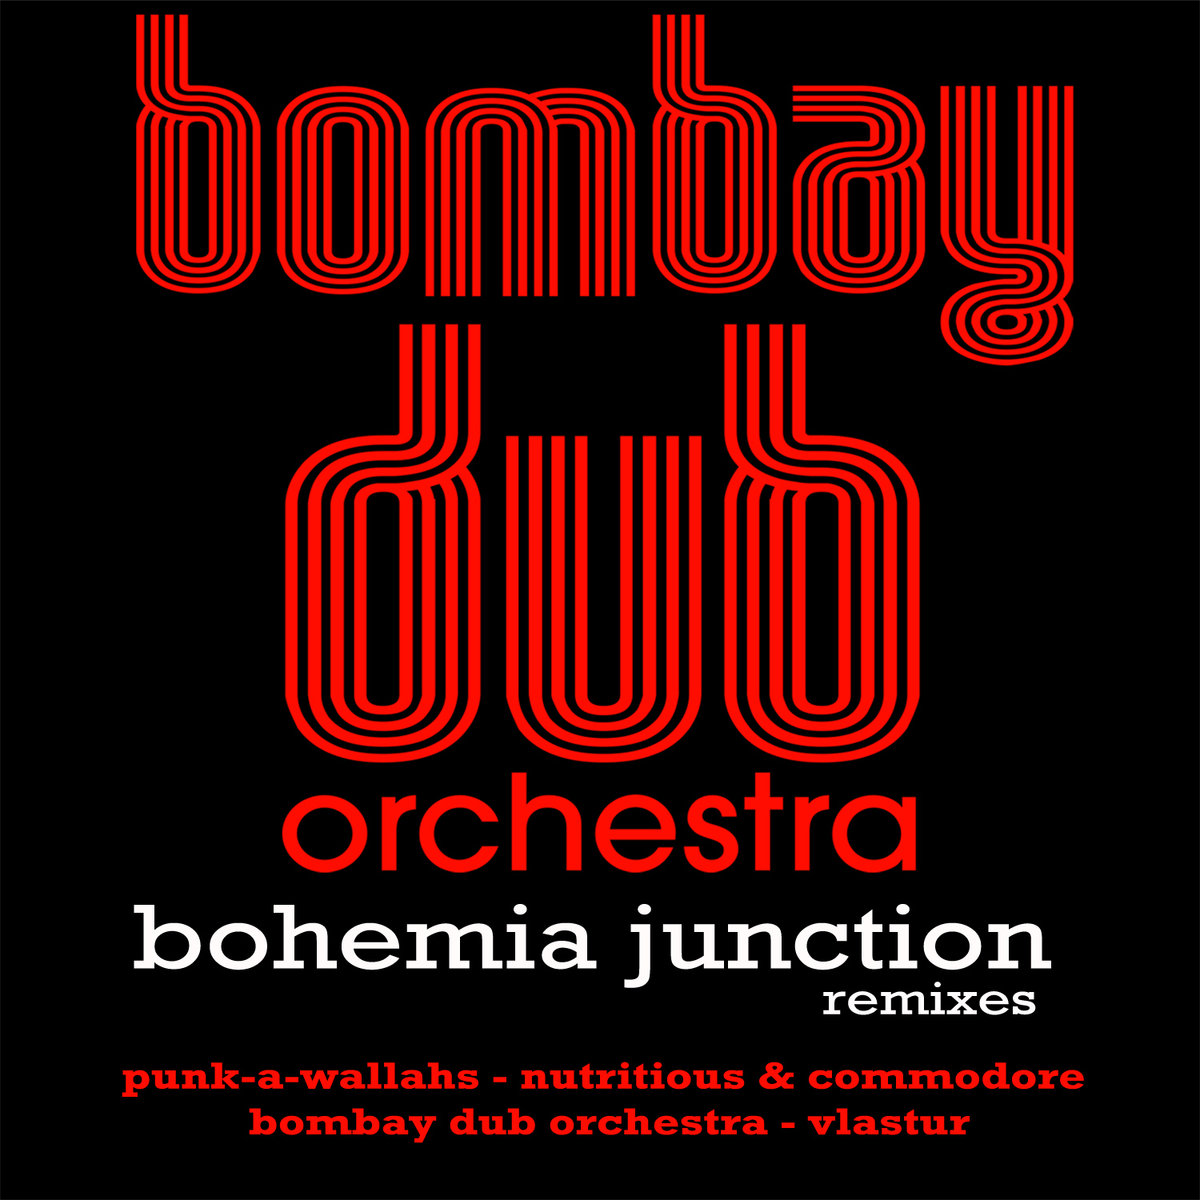 Images of Bombay Dub Orchestra | 1200x1200